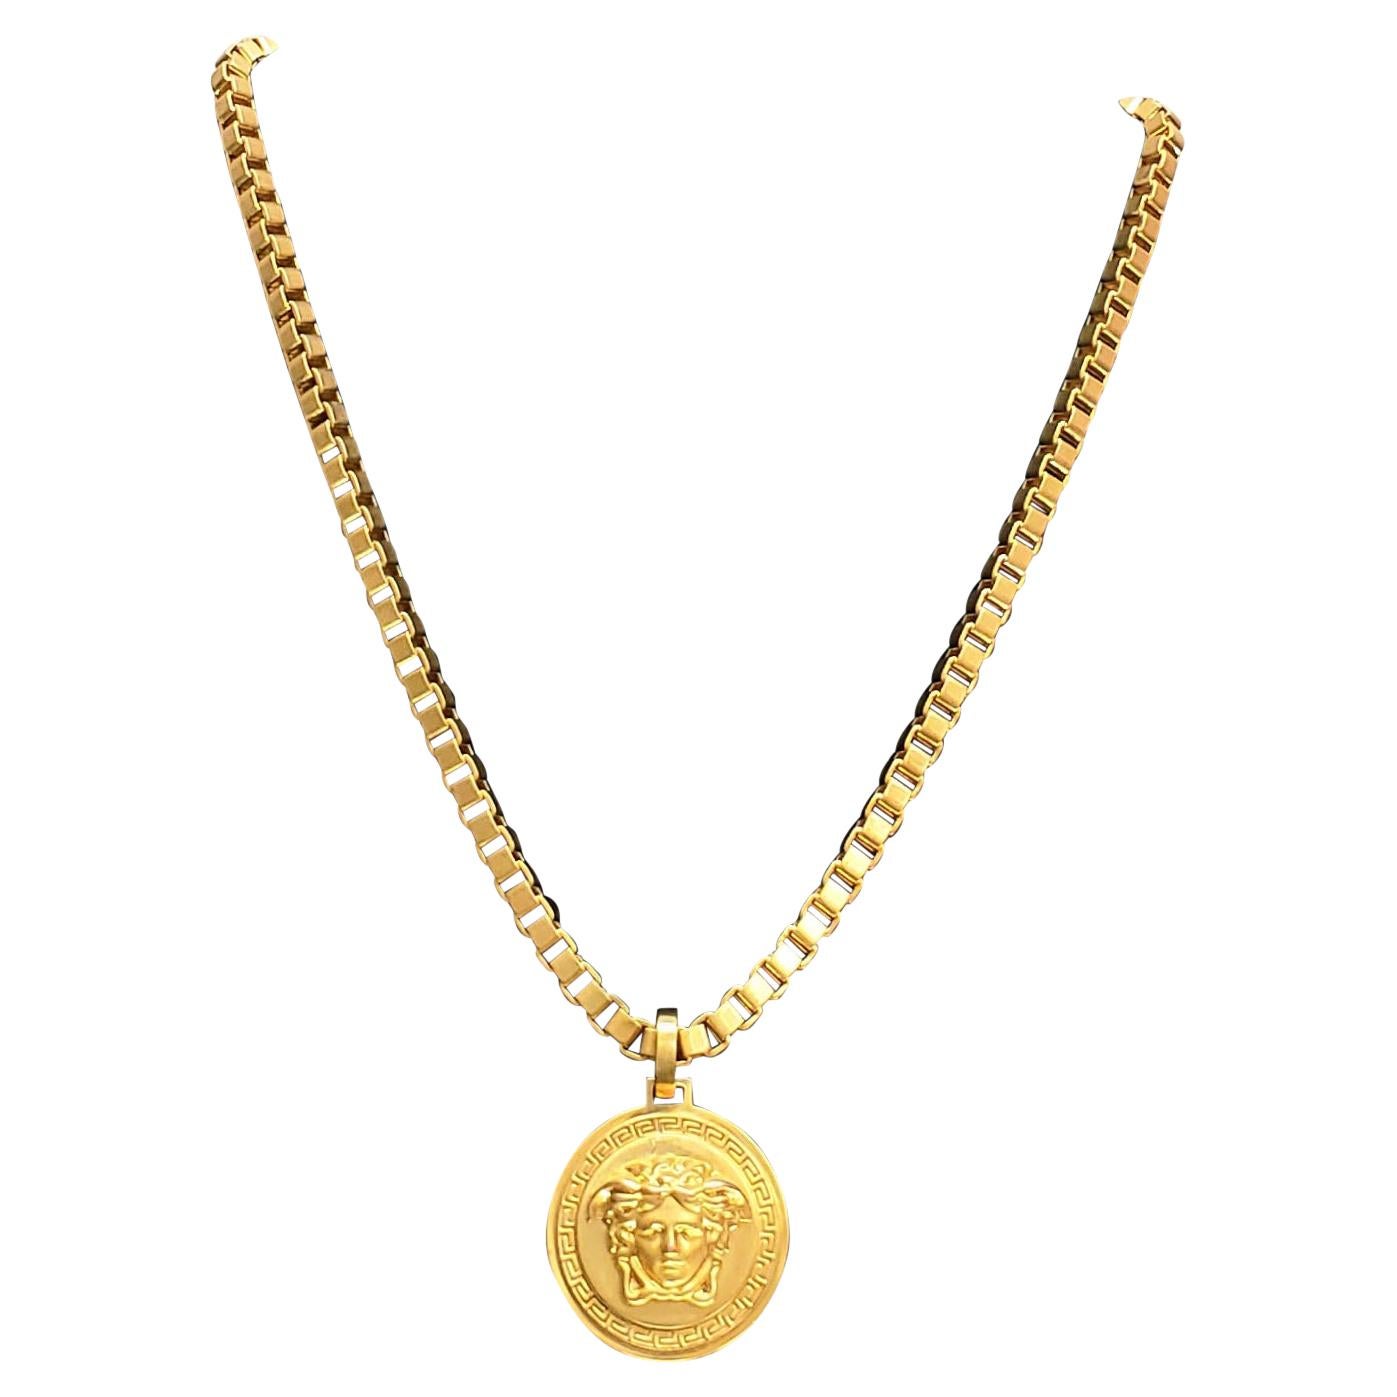 New VERSACE 24K GOLD PLATED MEDUSA CHAIN NECKLACE For Sale